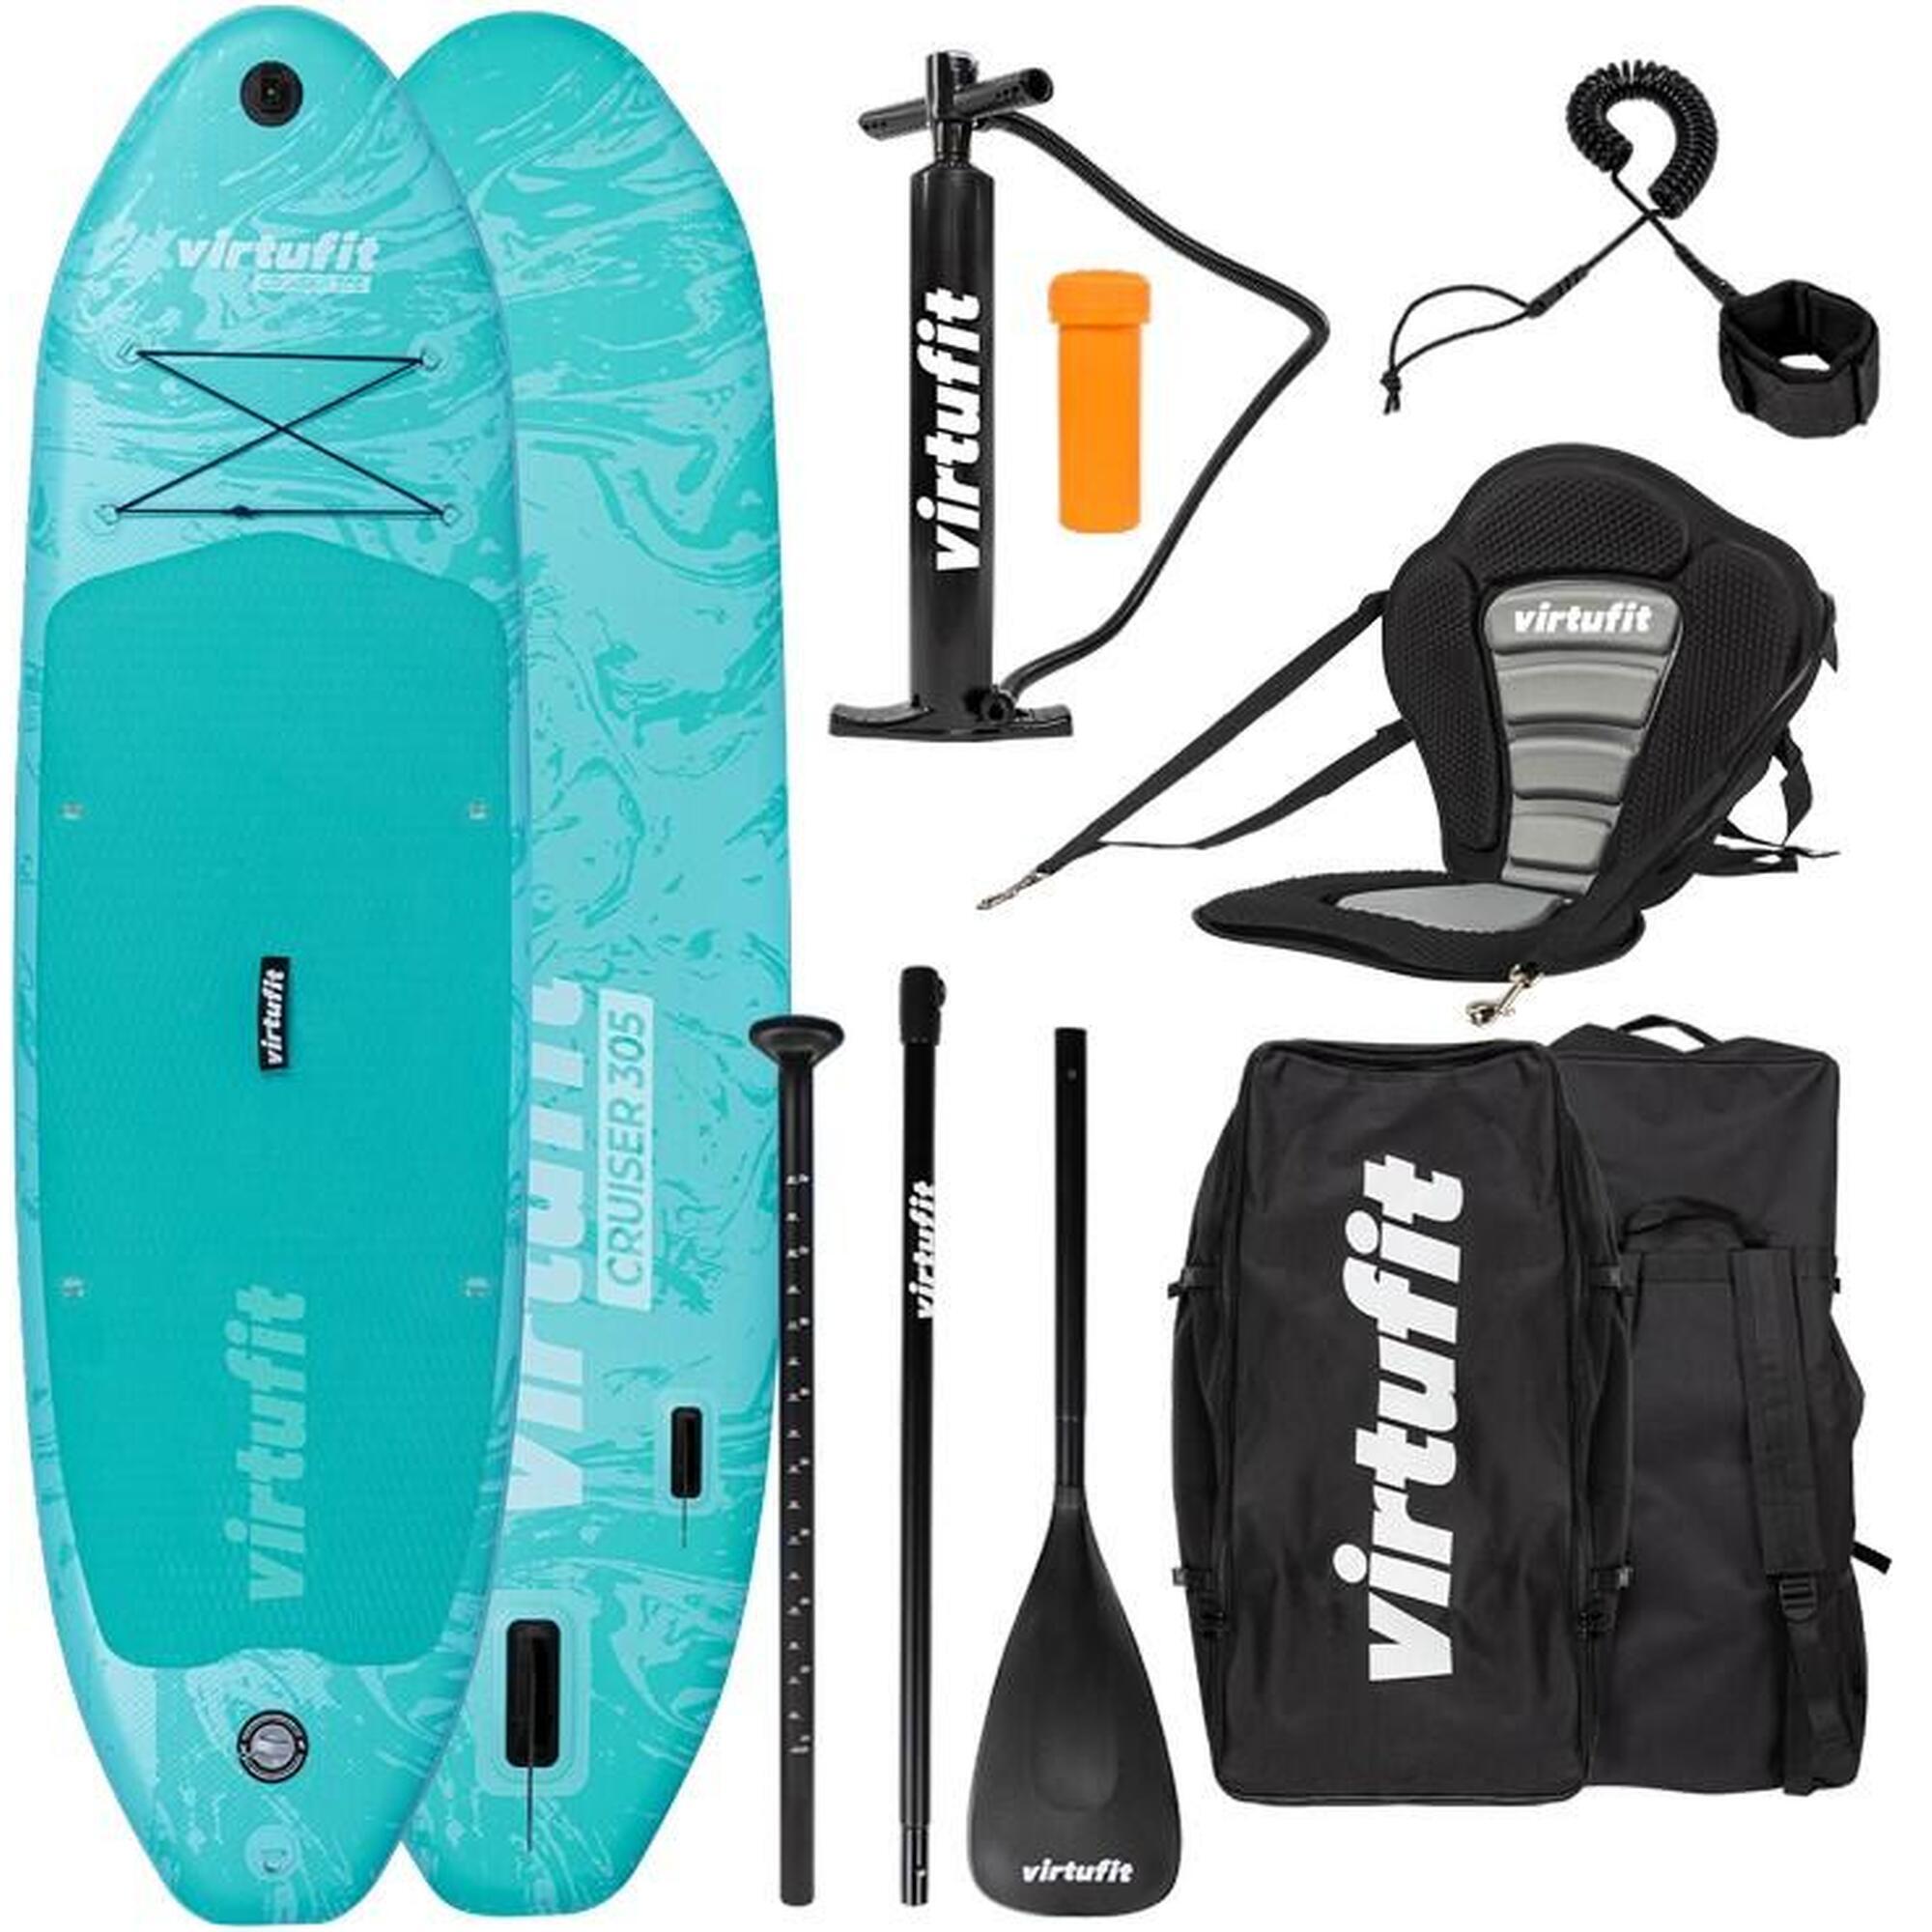 Stand up paddle - Cruiser 305 - Avec accessoires